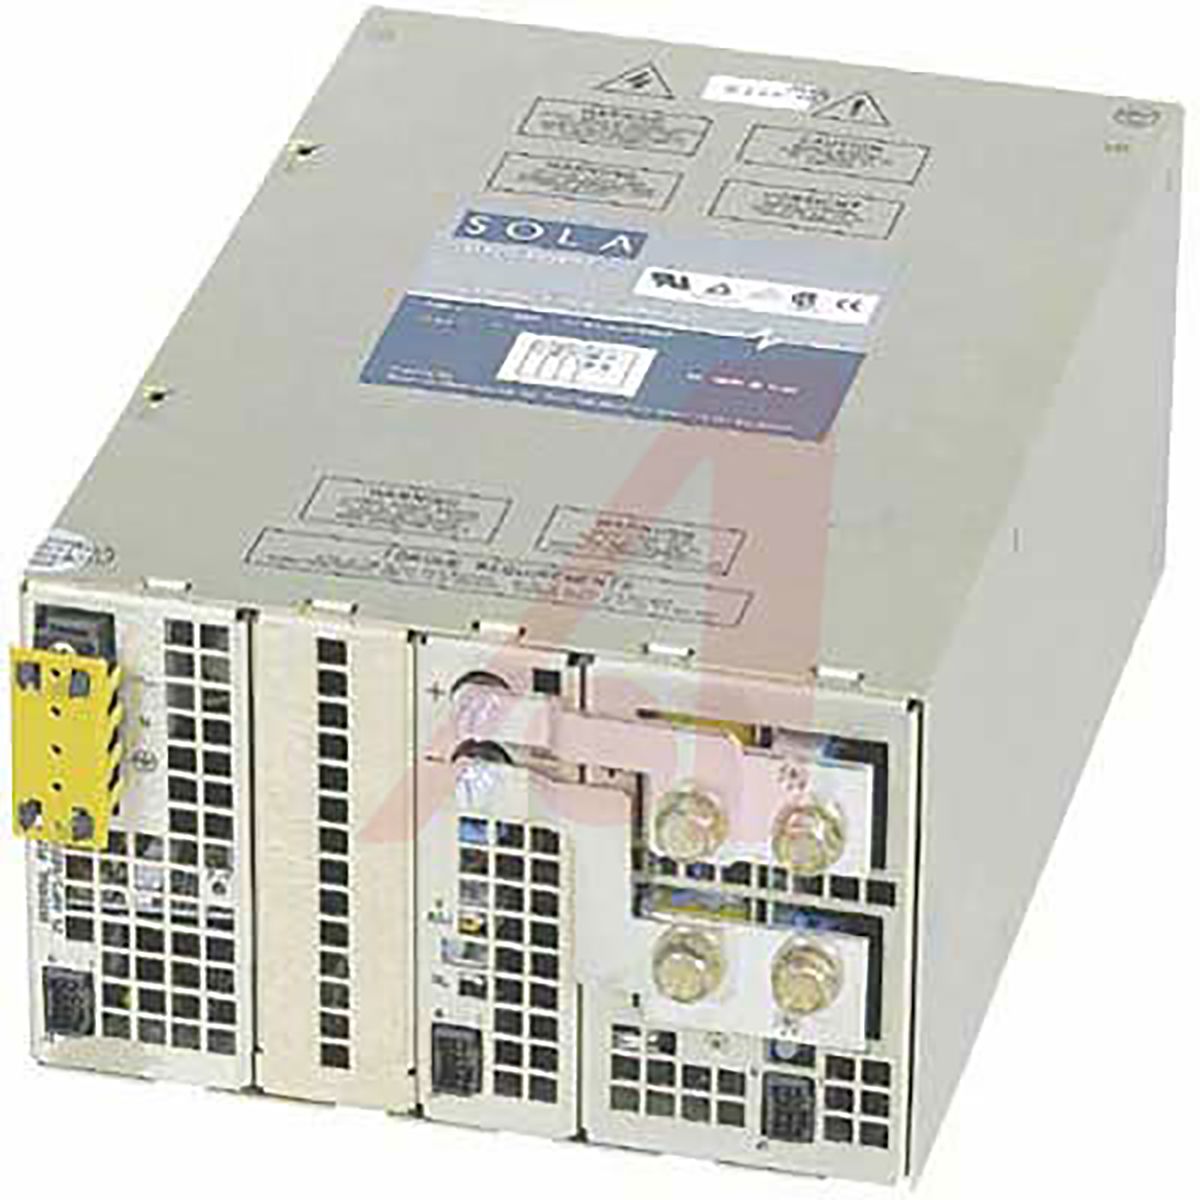 SolaHD Enclosed, Switching Power Supply, 24V dc, 62.4A, 1.5kW